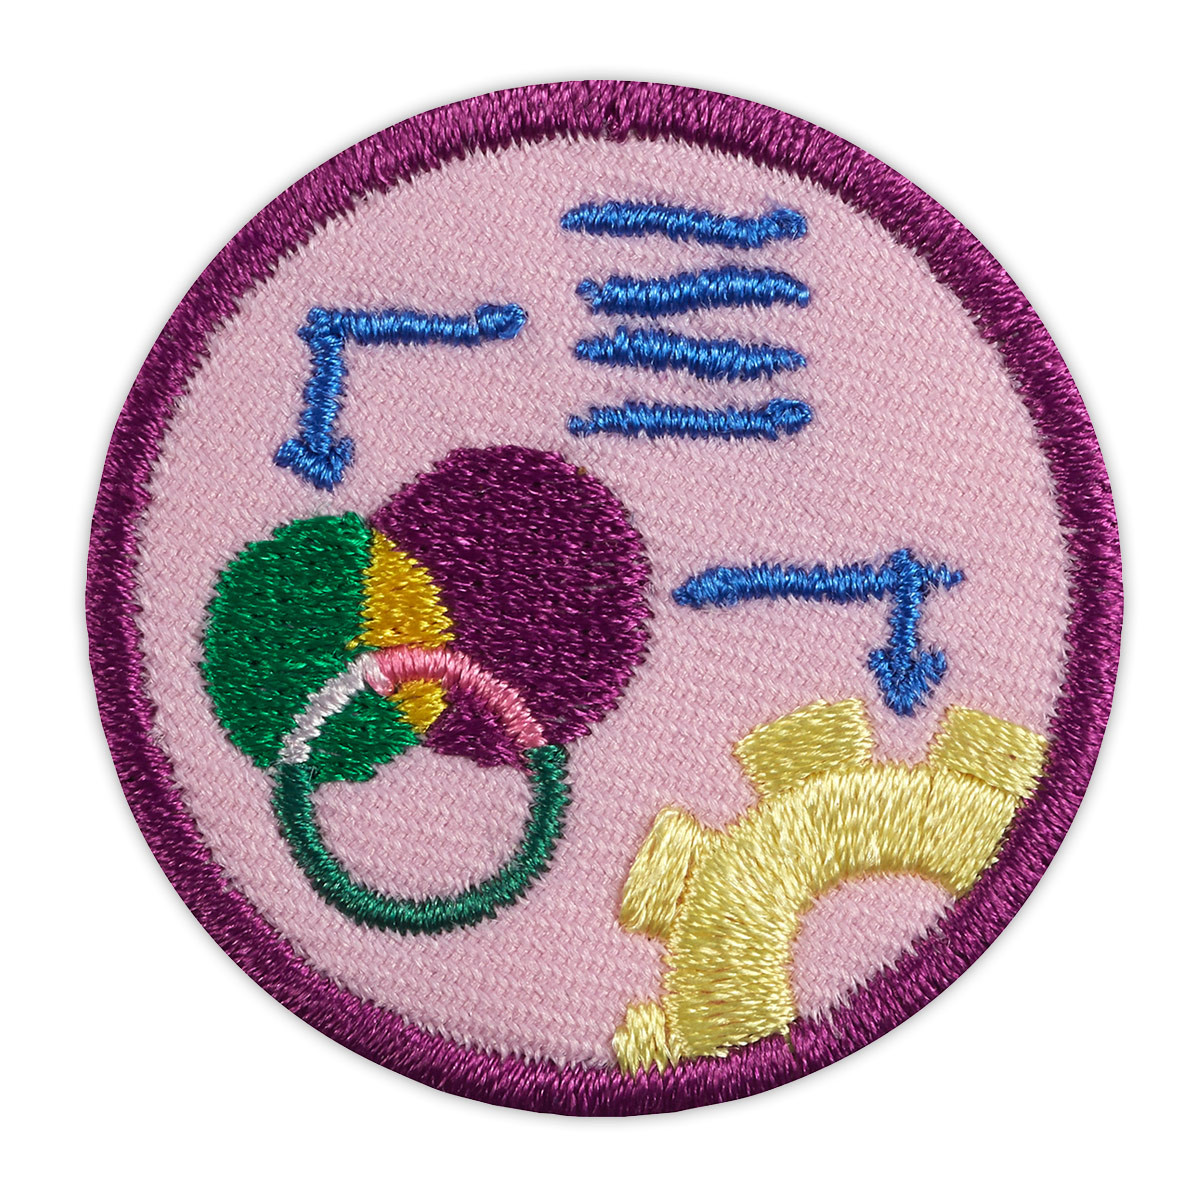 Think Like an Engineer Girl Scout Badge